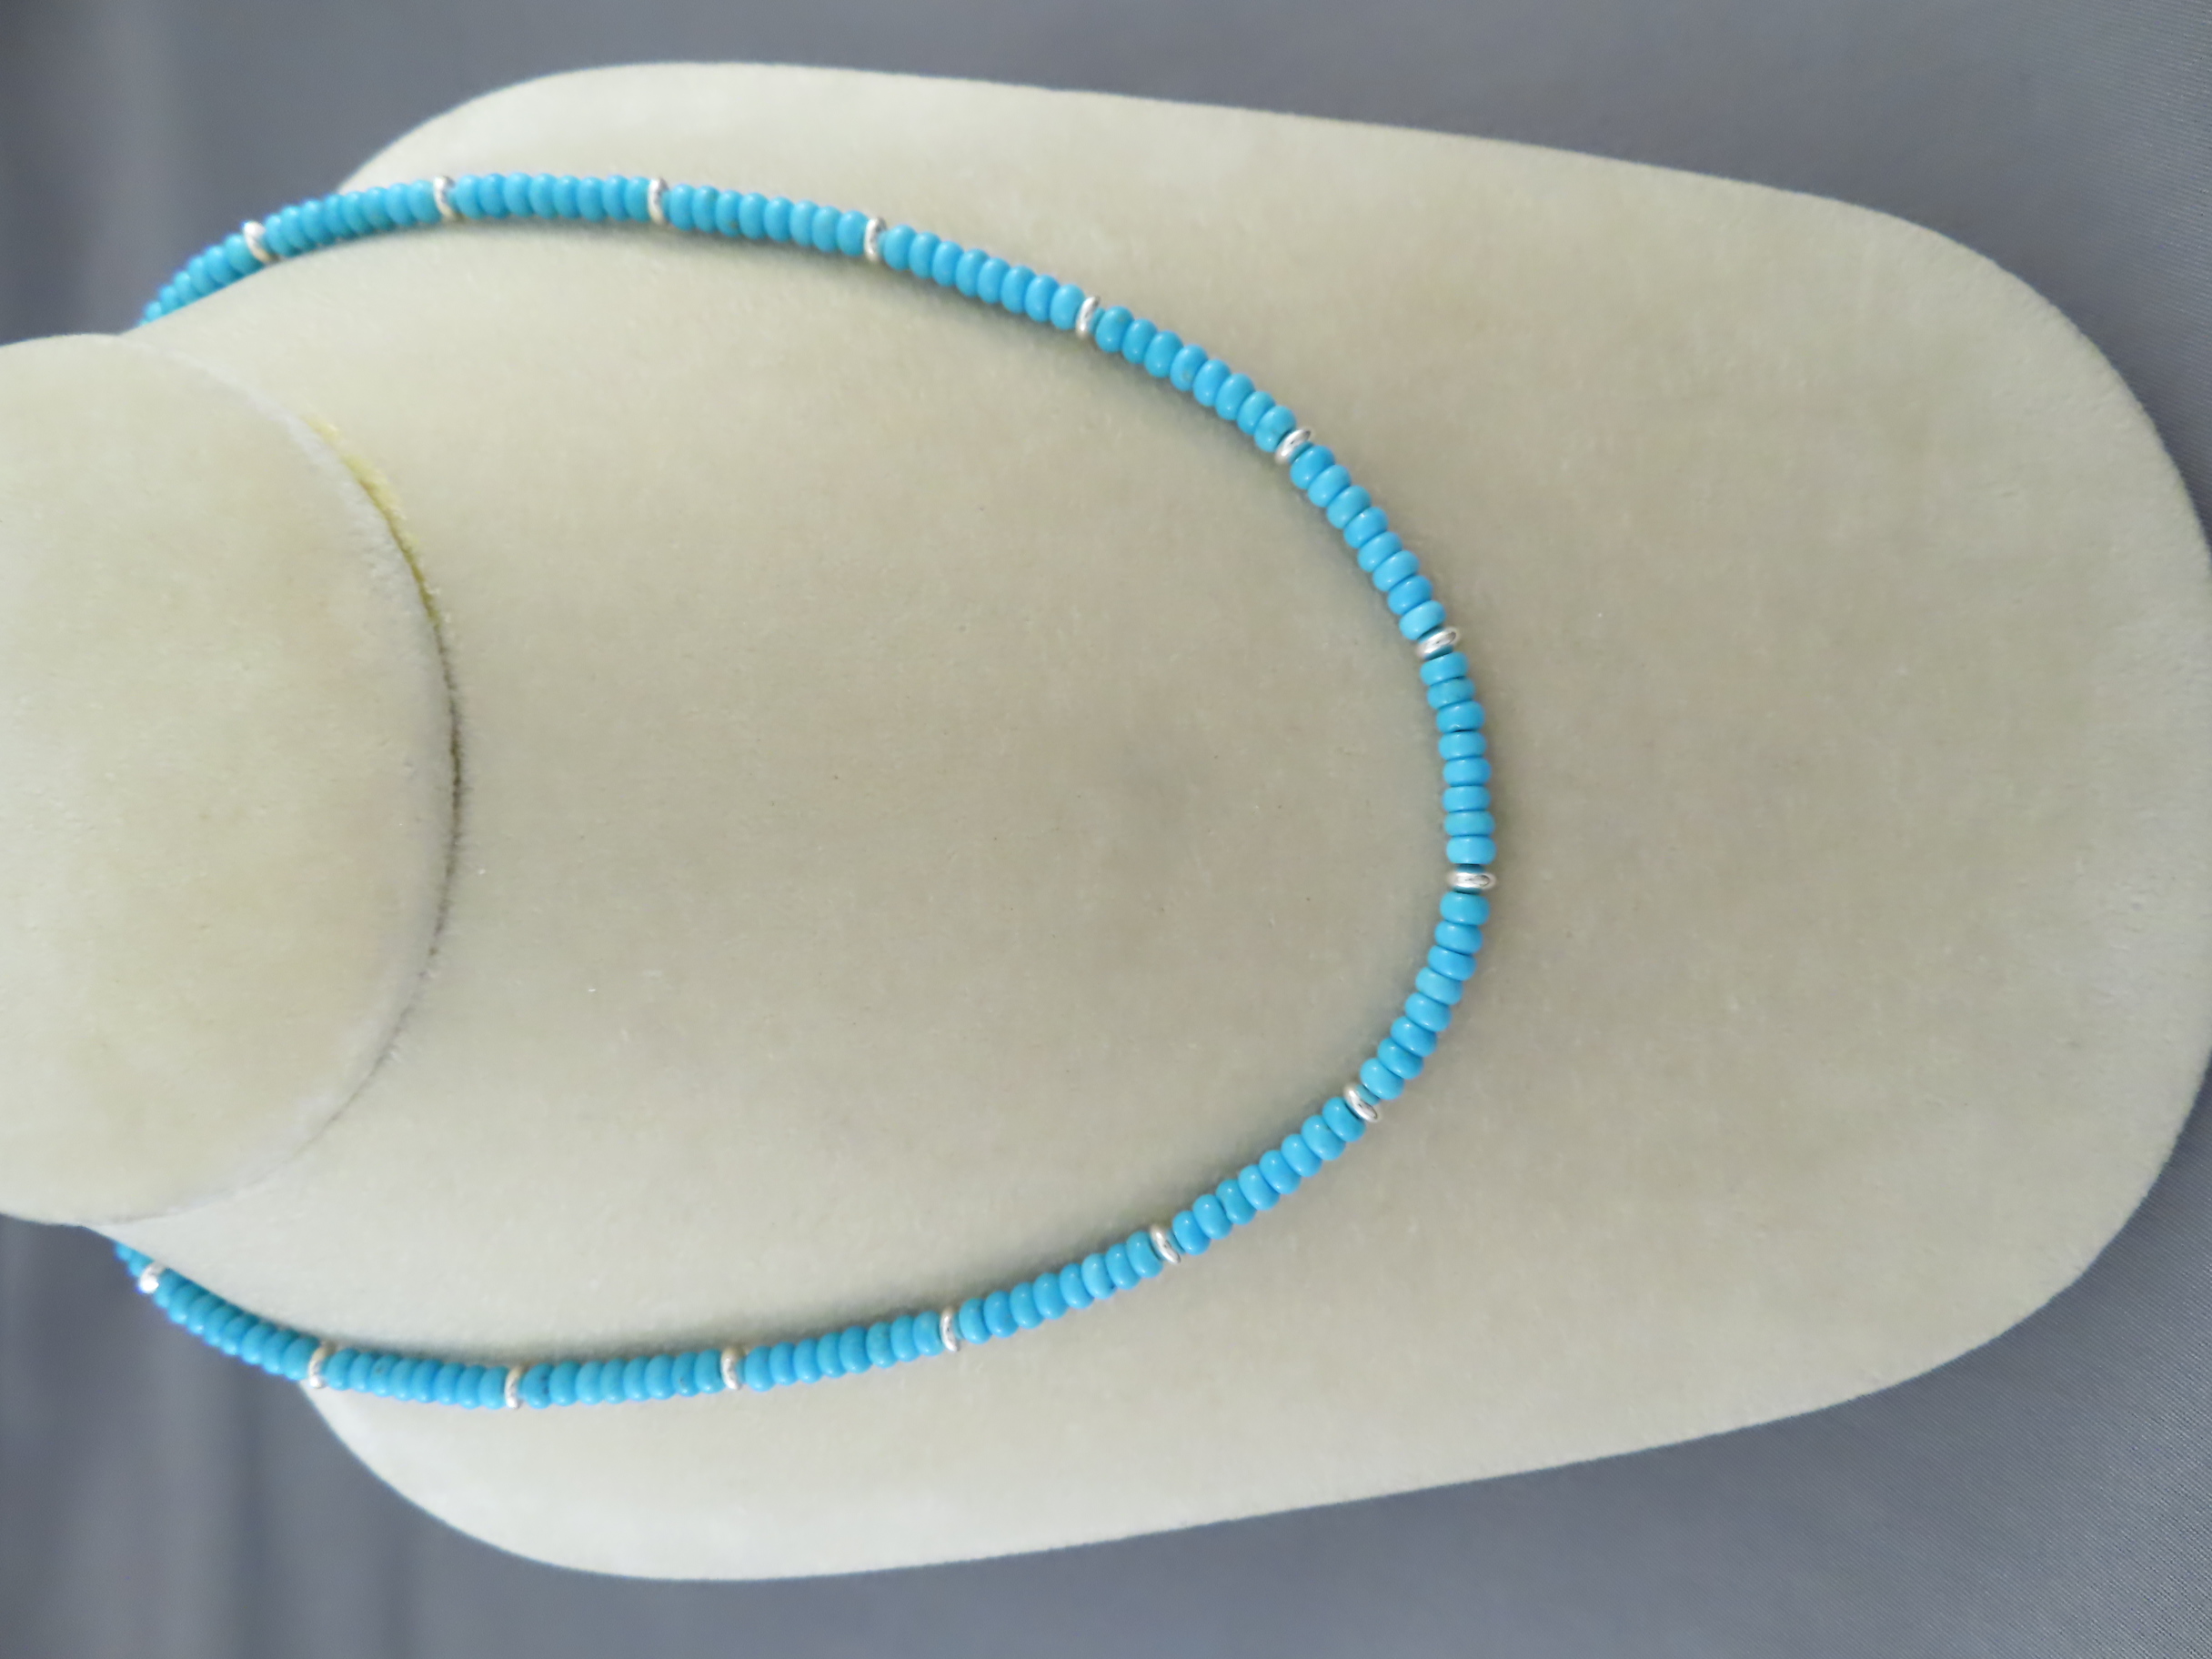 Shop Turquoise Jewelry - Dainty Sleeping Beauty Turquoise Necklace by Navajo Indian jewelry artist, Desiree Yellowhorse $525- FOR SALE